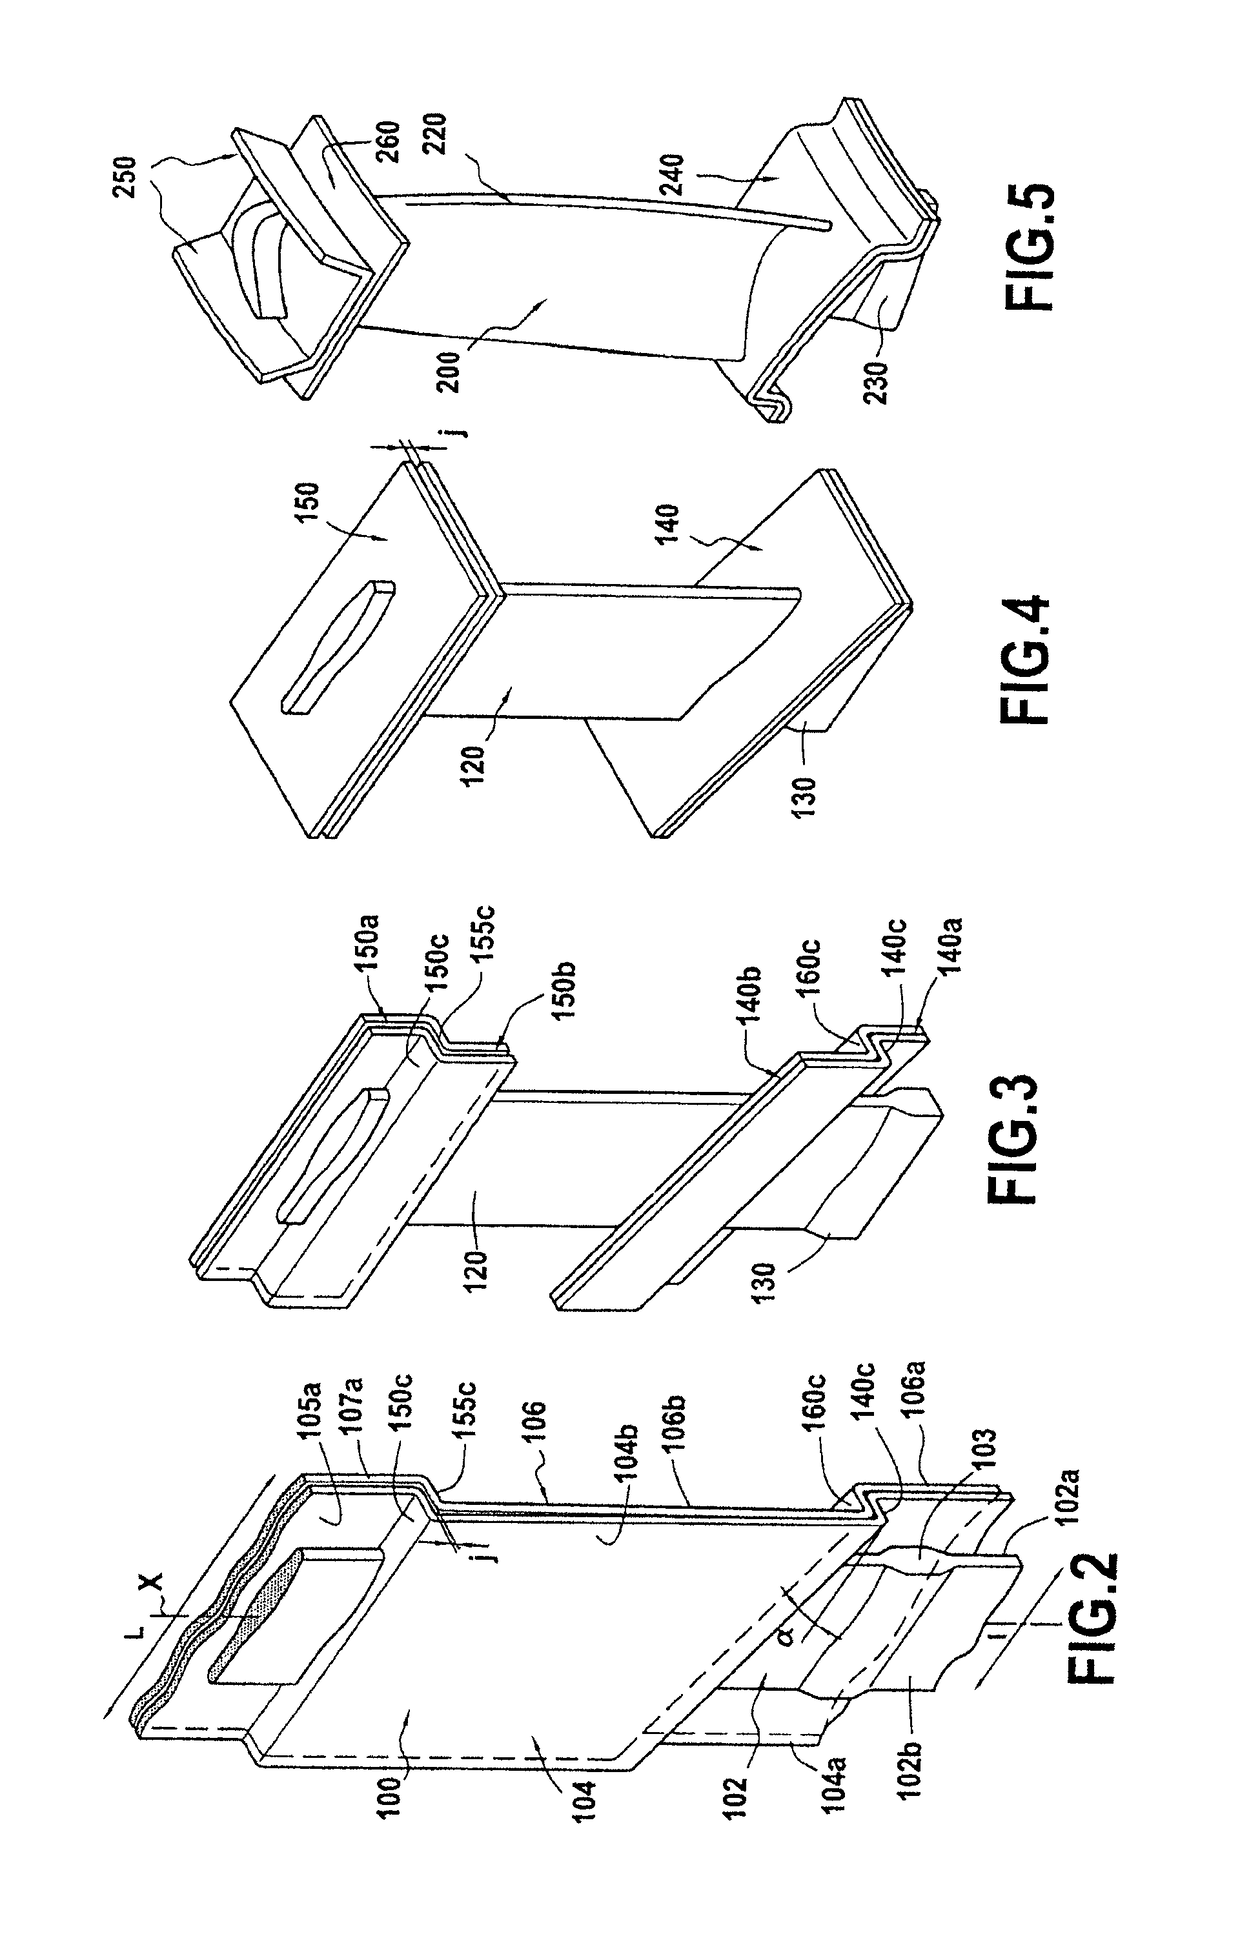 Turbine engine blade made of composite material, and a method of fabricating it